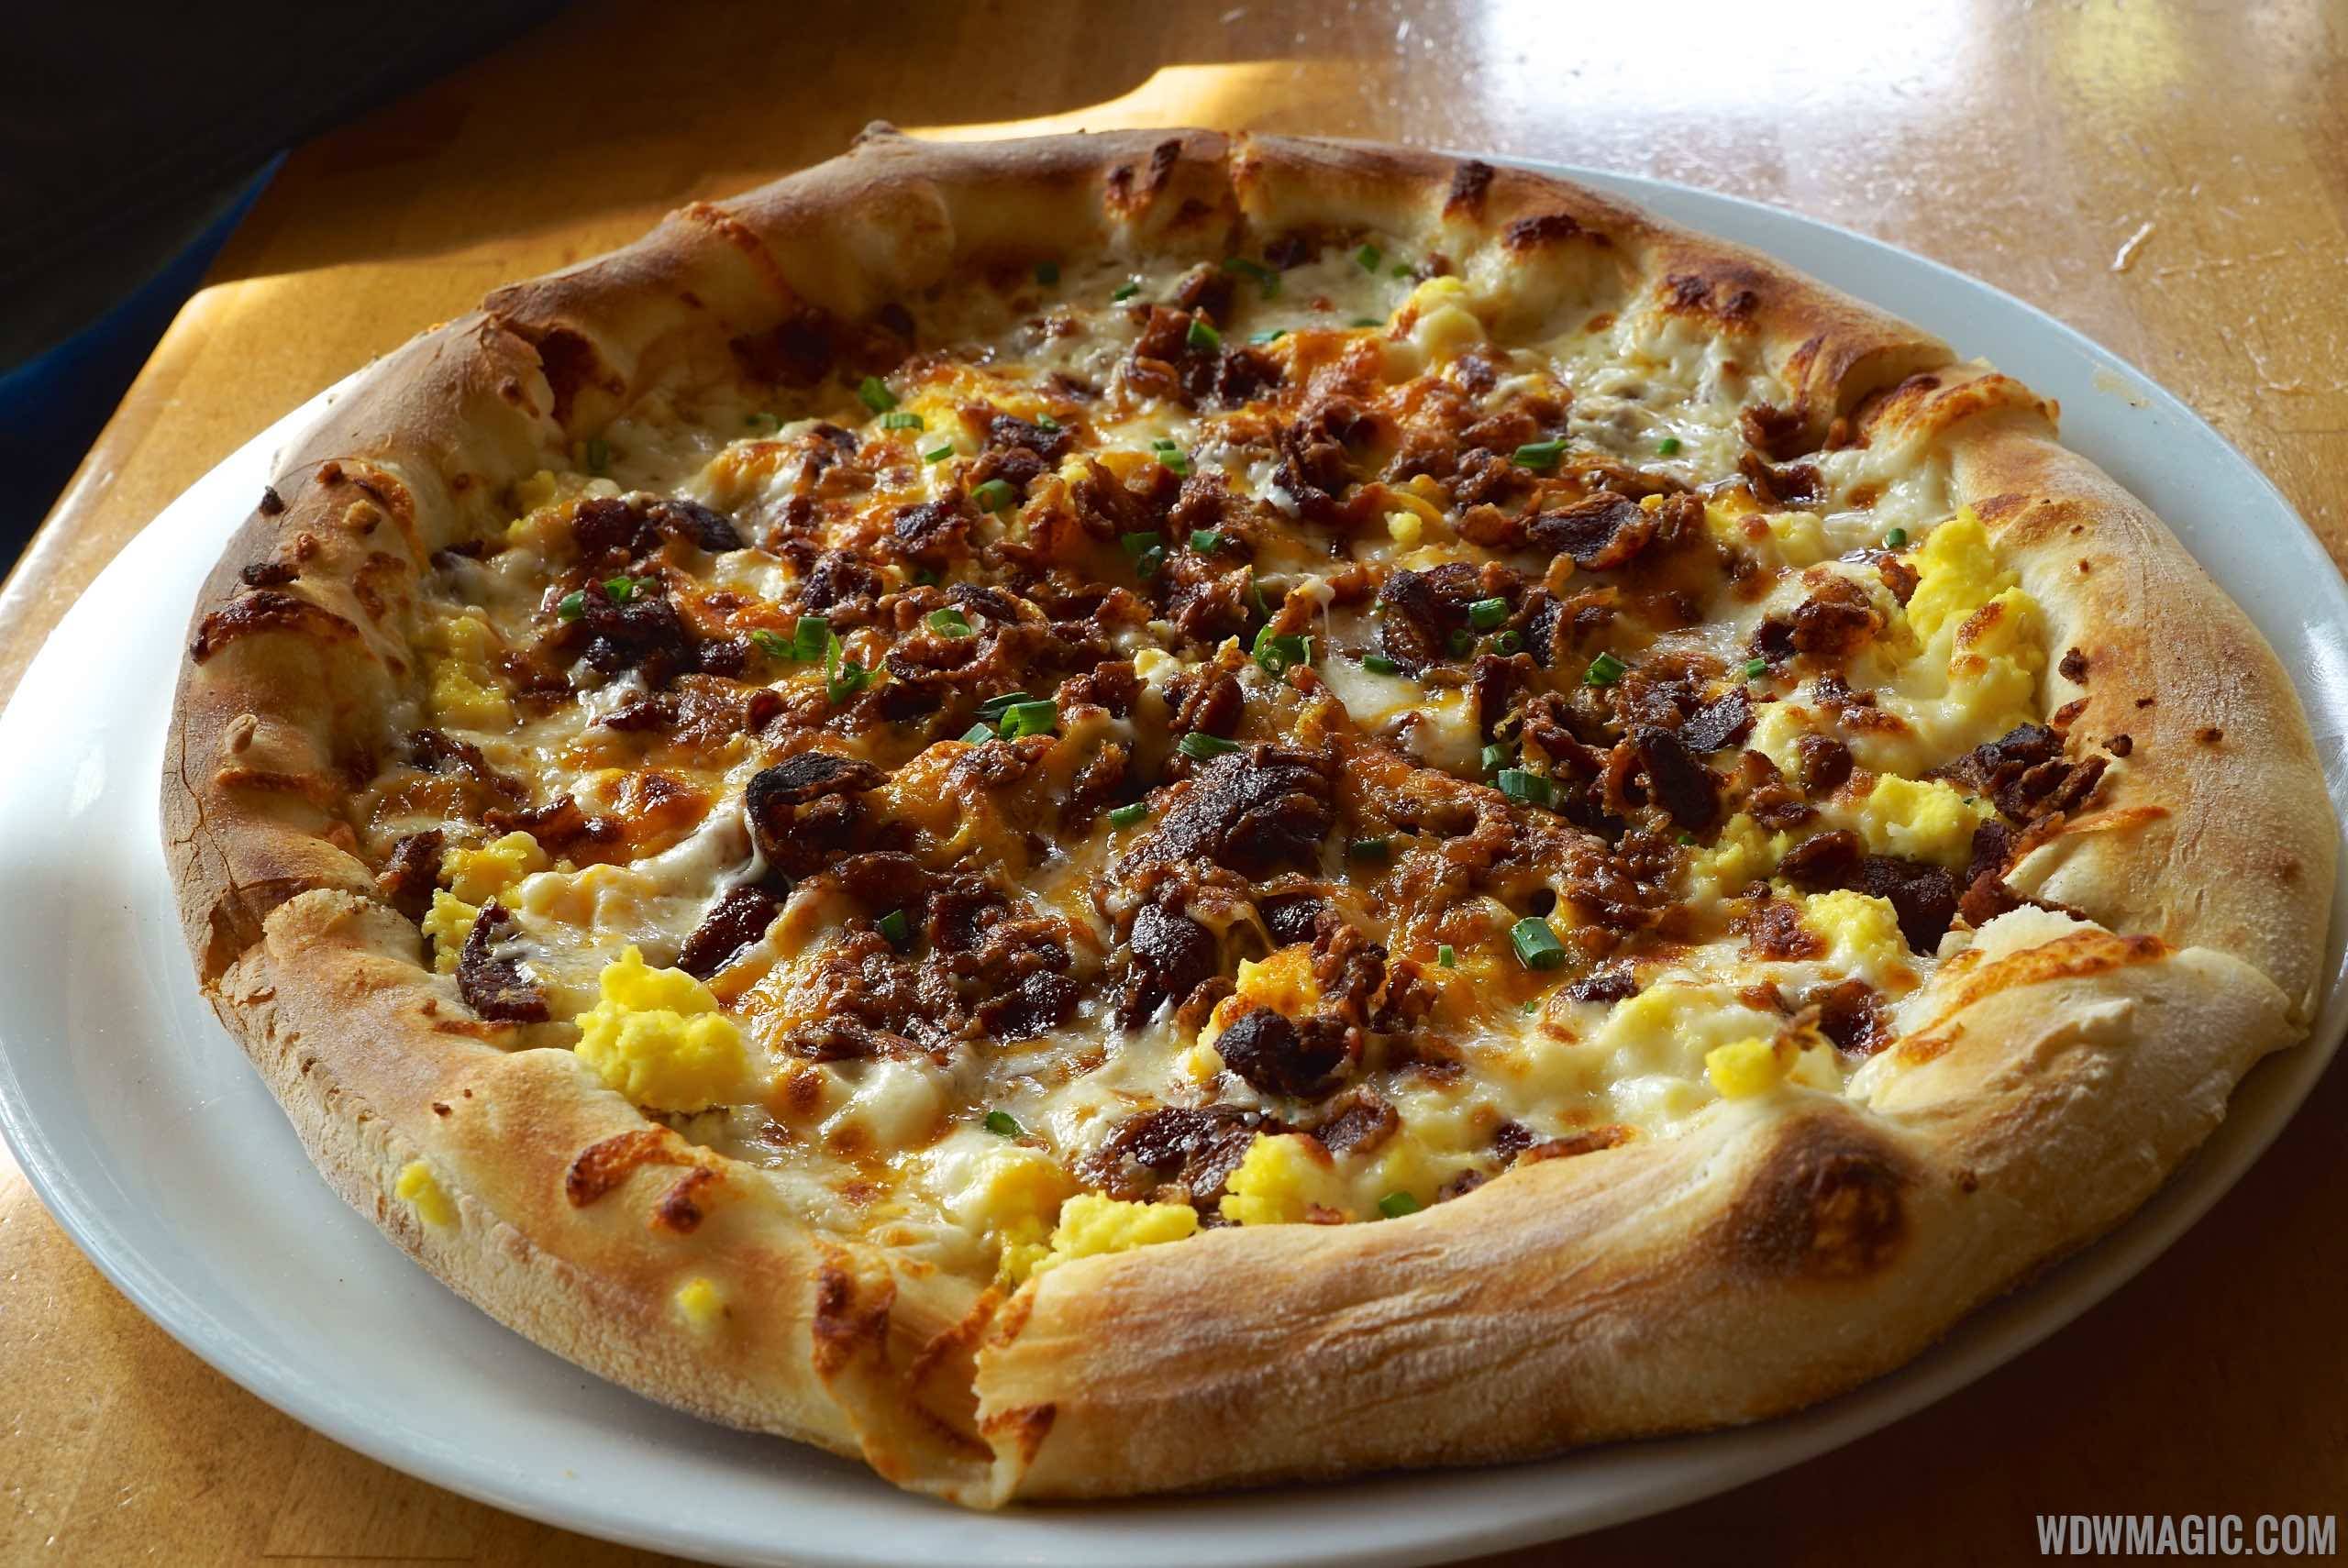 Wolfgang Puck Express Marketplace breakfast - Breakfast Pizza with Egg Whites Scrambled Egg Whites, Bacon, Mozzarella, Cheddar and Carmelized Onions $14.50